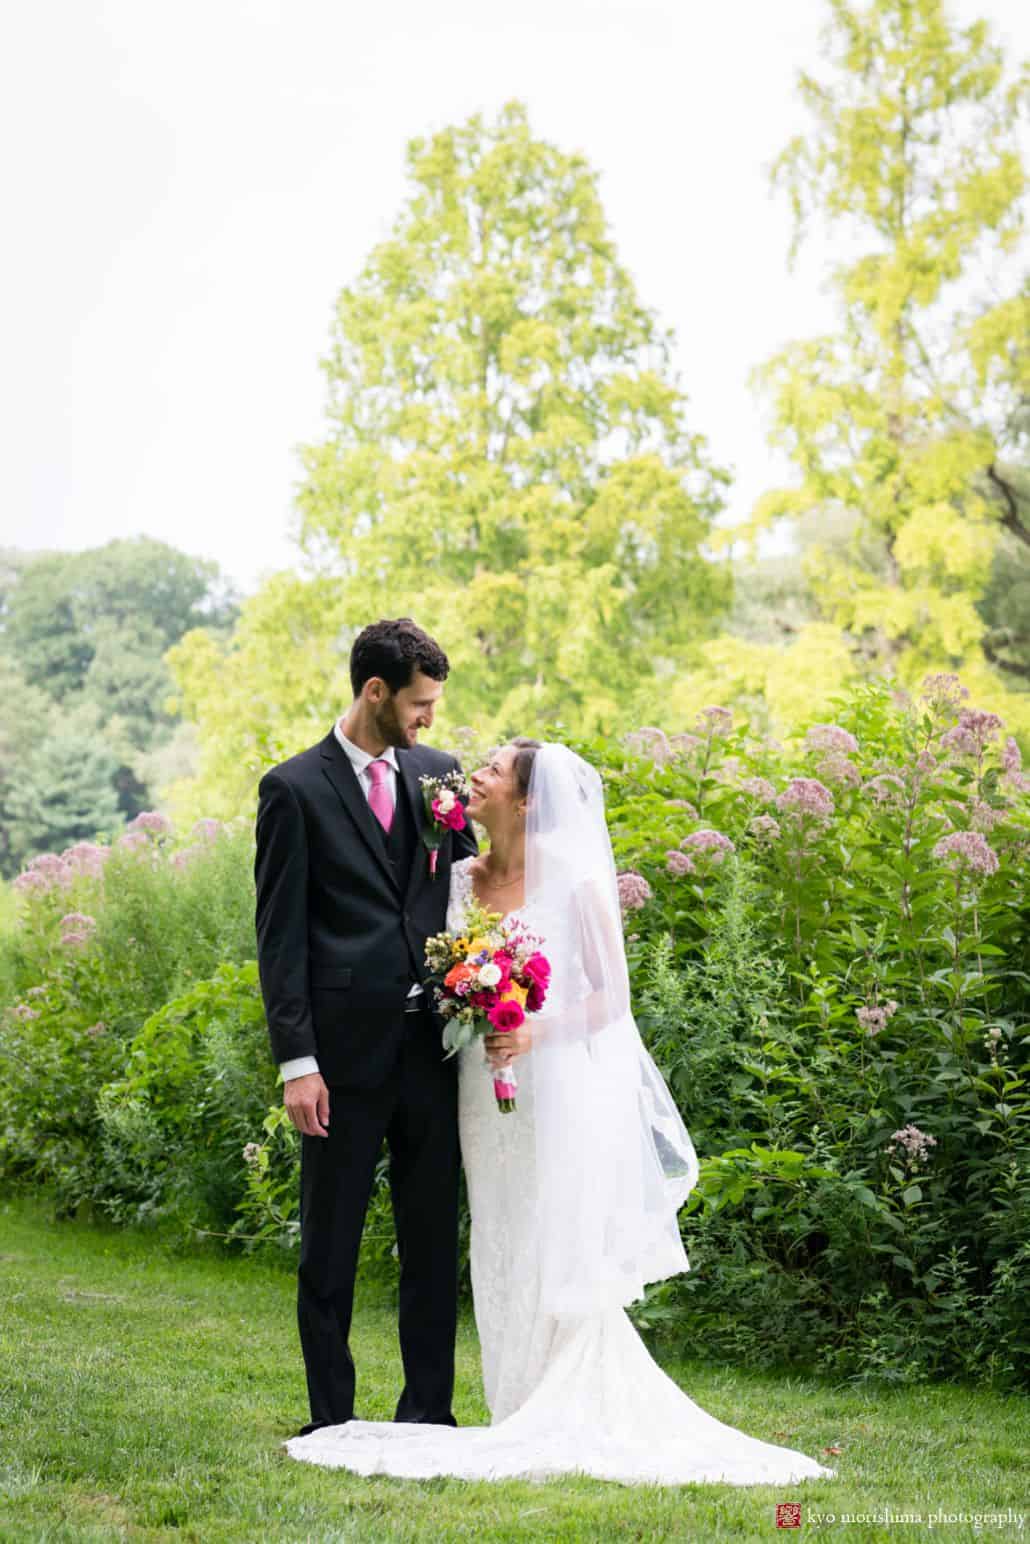 Bride and groom smile at each other during relaxed wedding portrait session at Princeton's Chauncey Center with tall flower bushes in the background.